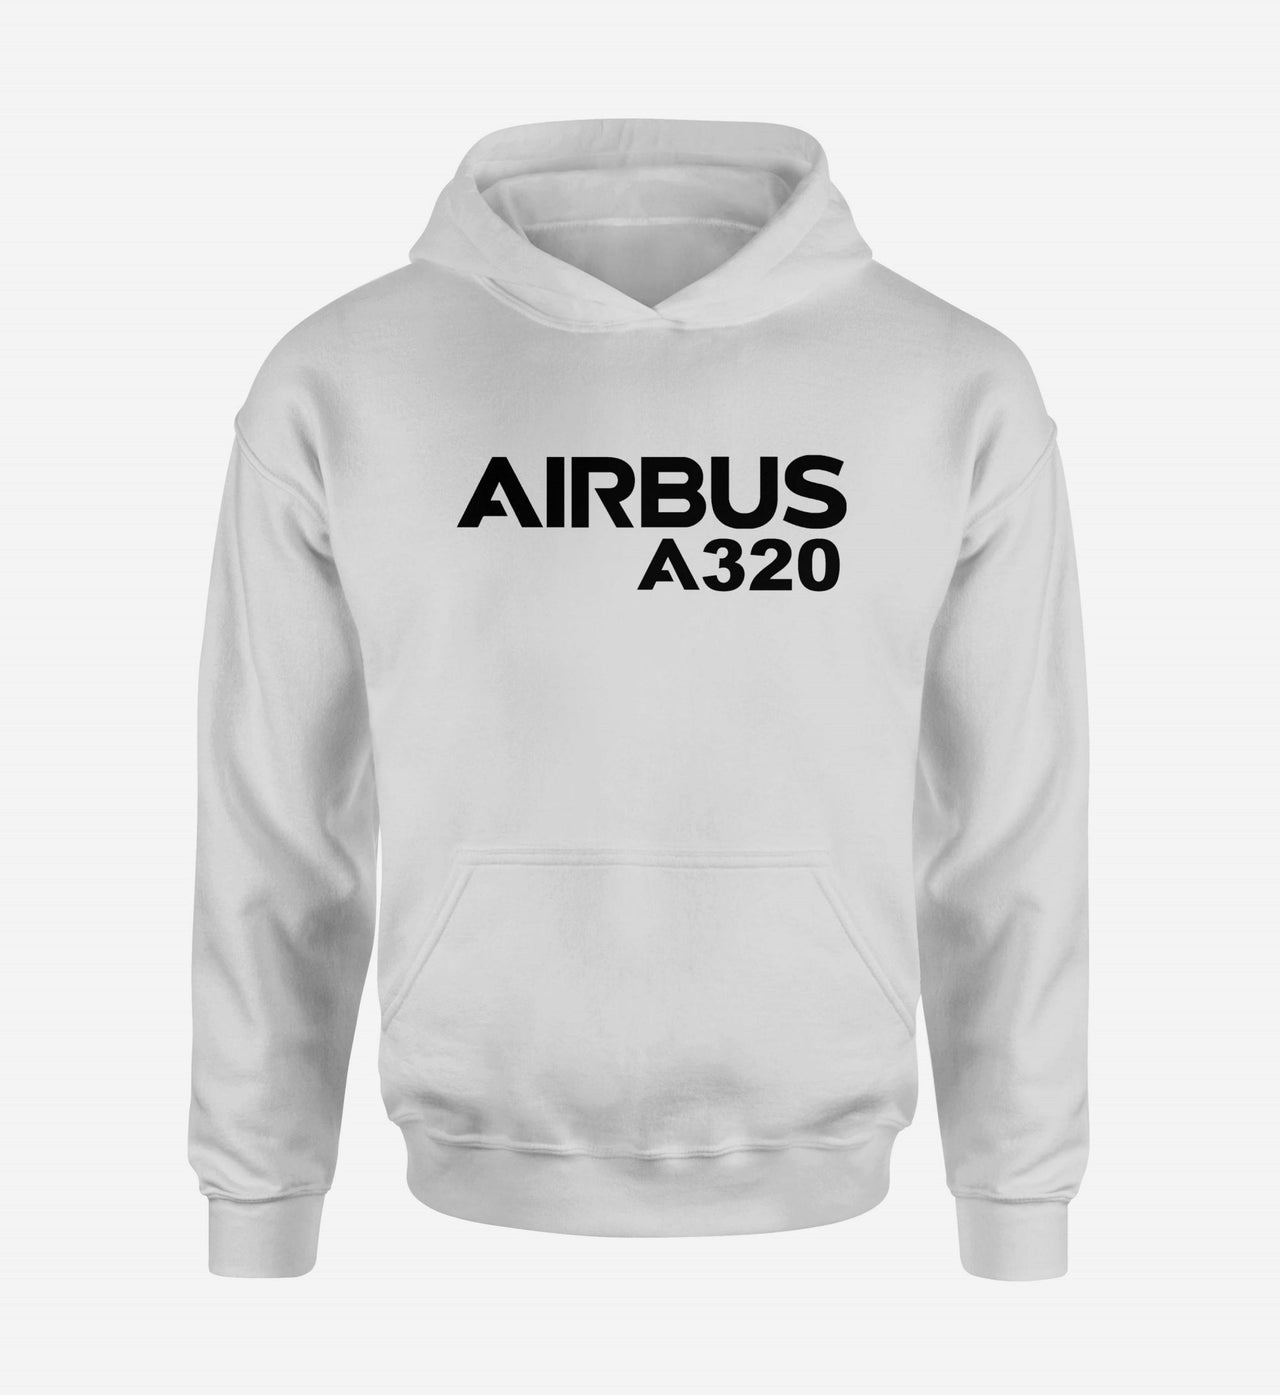 Airbus A320 & Text Designed Hoodies